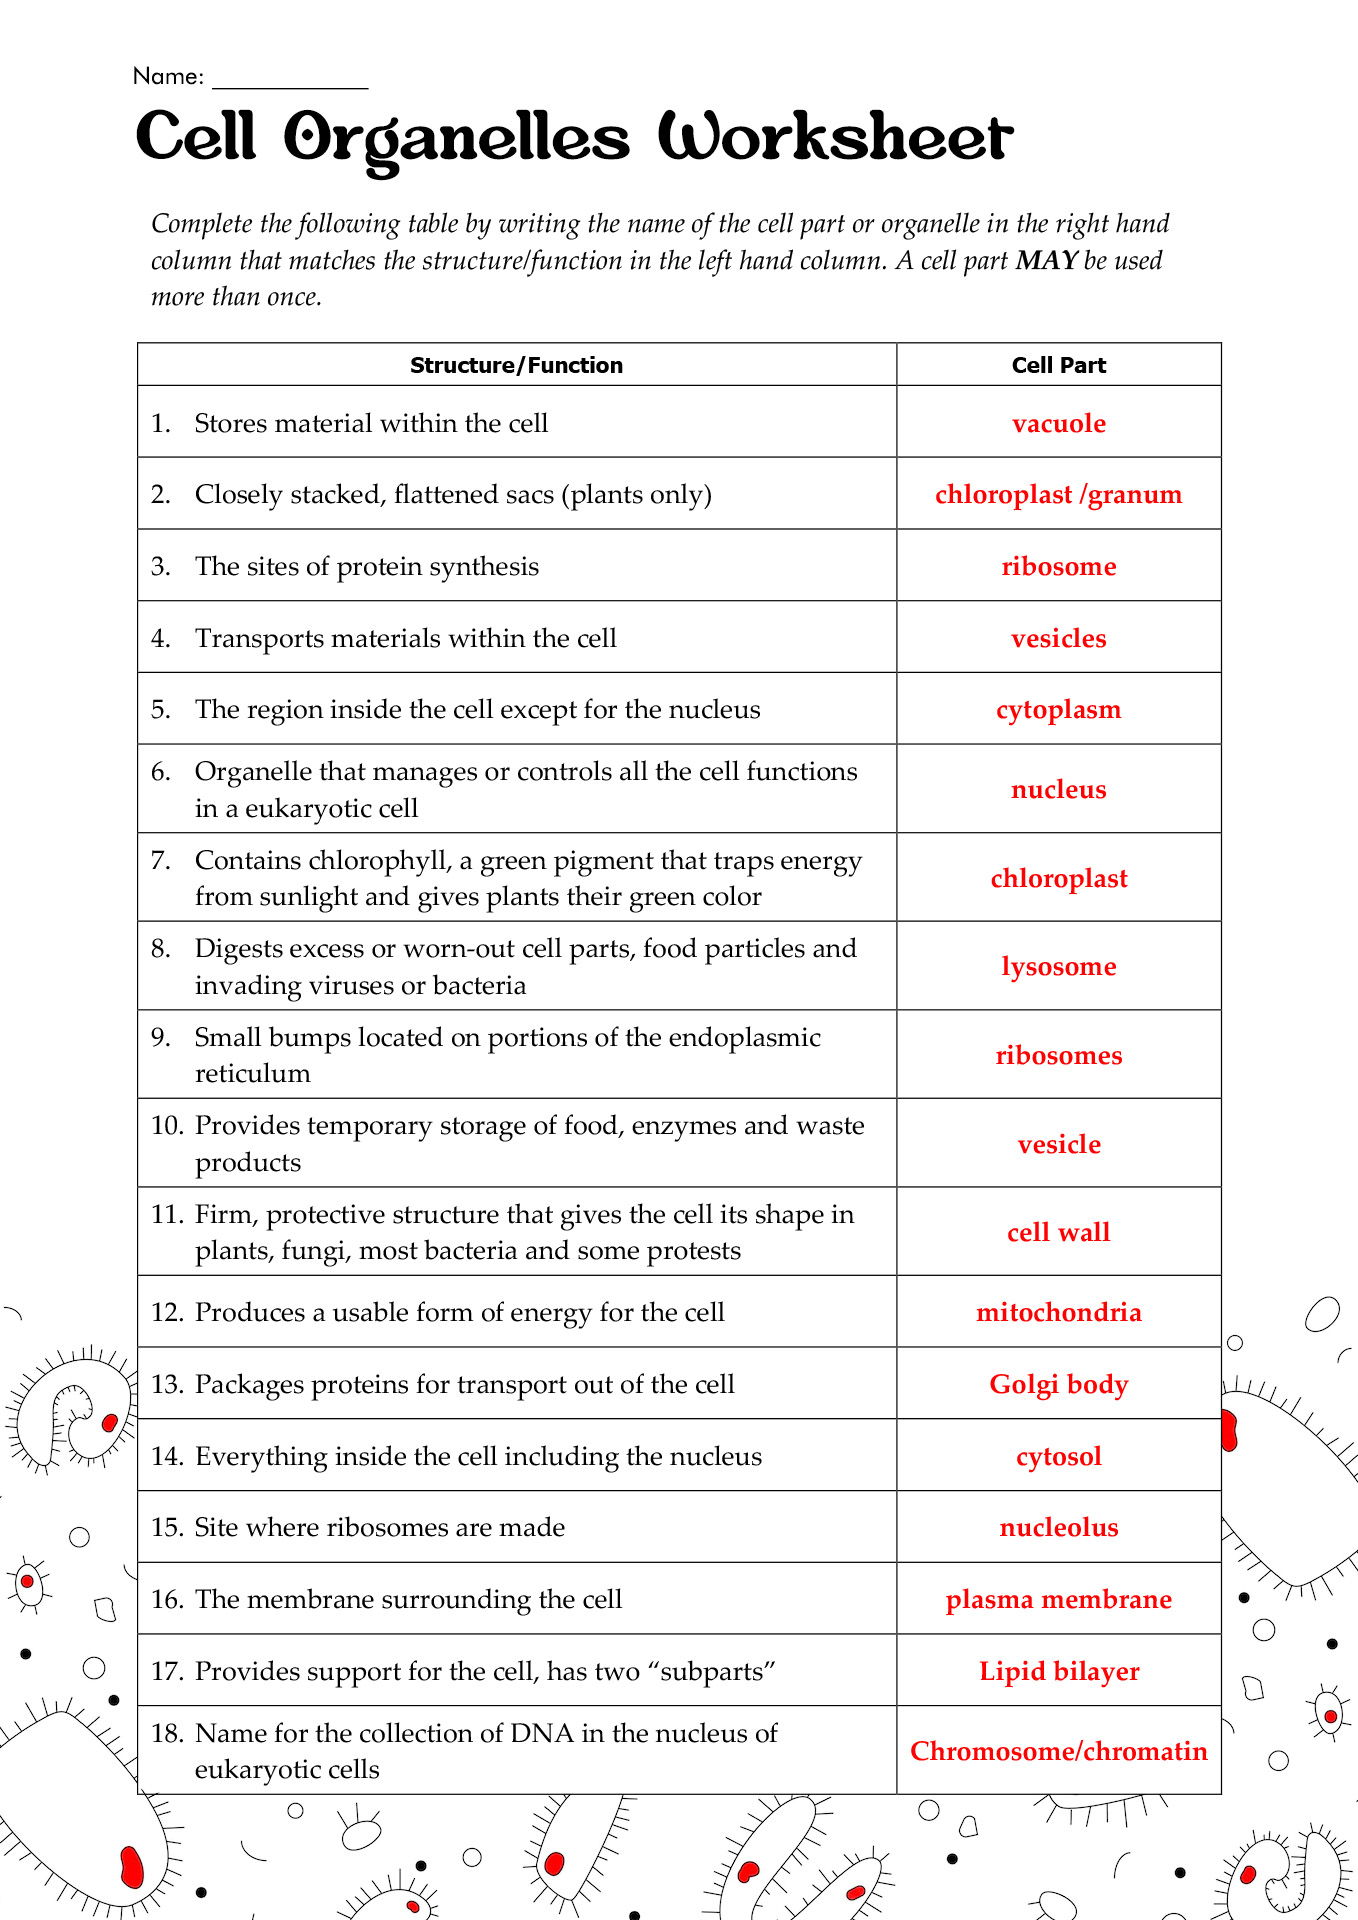 Cell Organelles Worksheet Answers Image